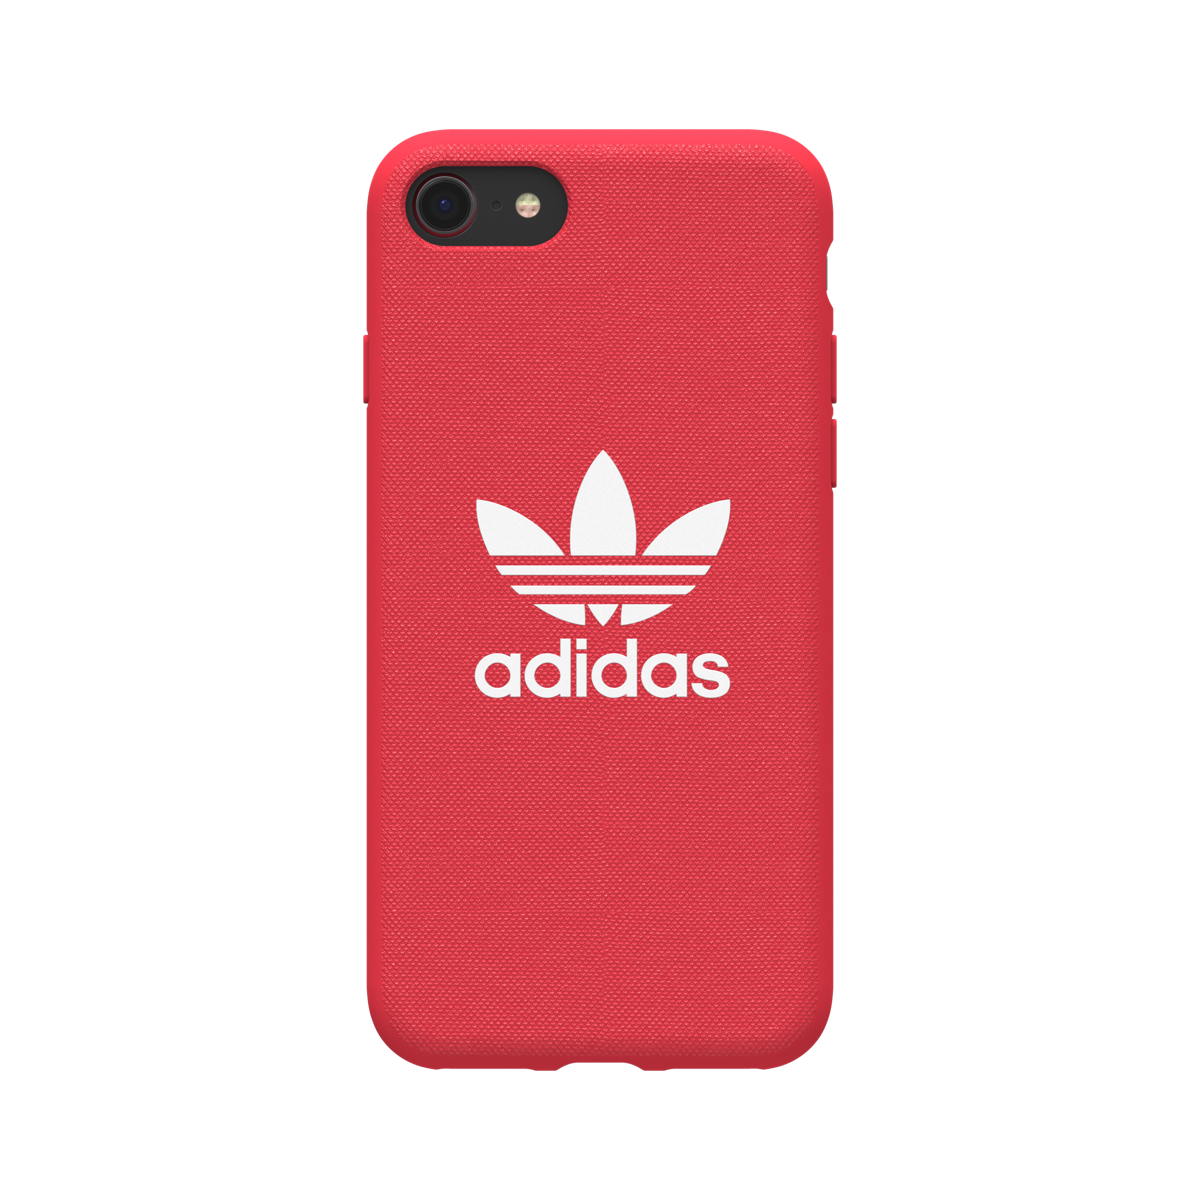 sigaar Flitsend tumor adidas Originals introduces new throwback cases for iPhone 7/8/Plus and X